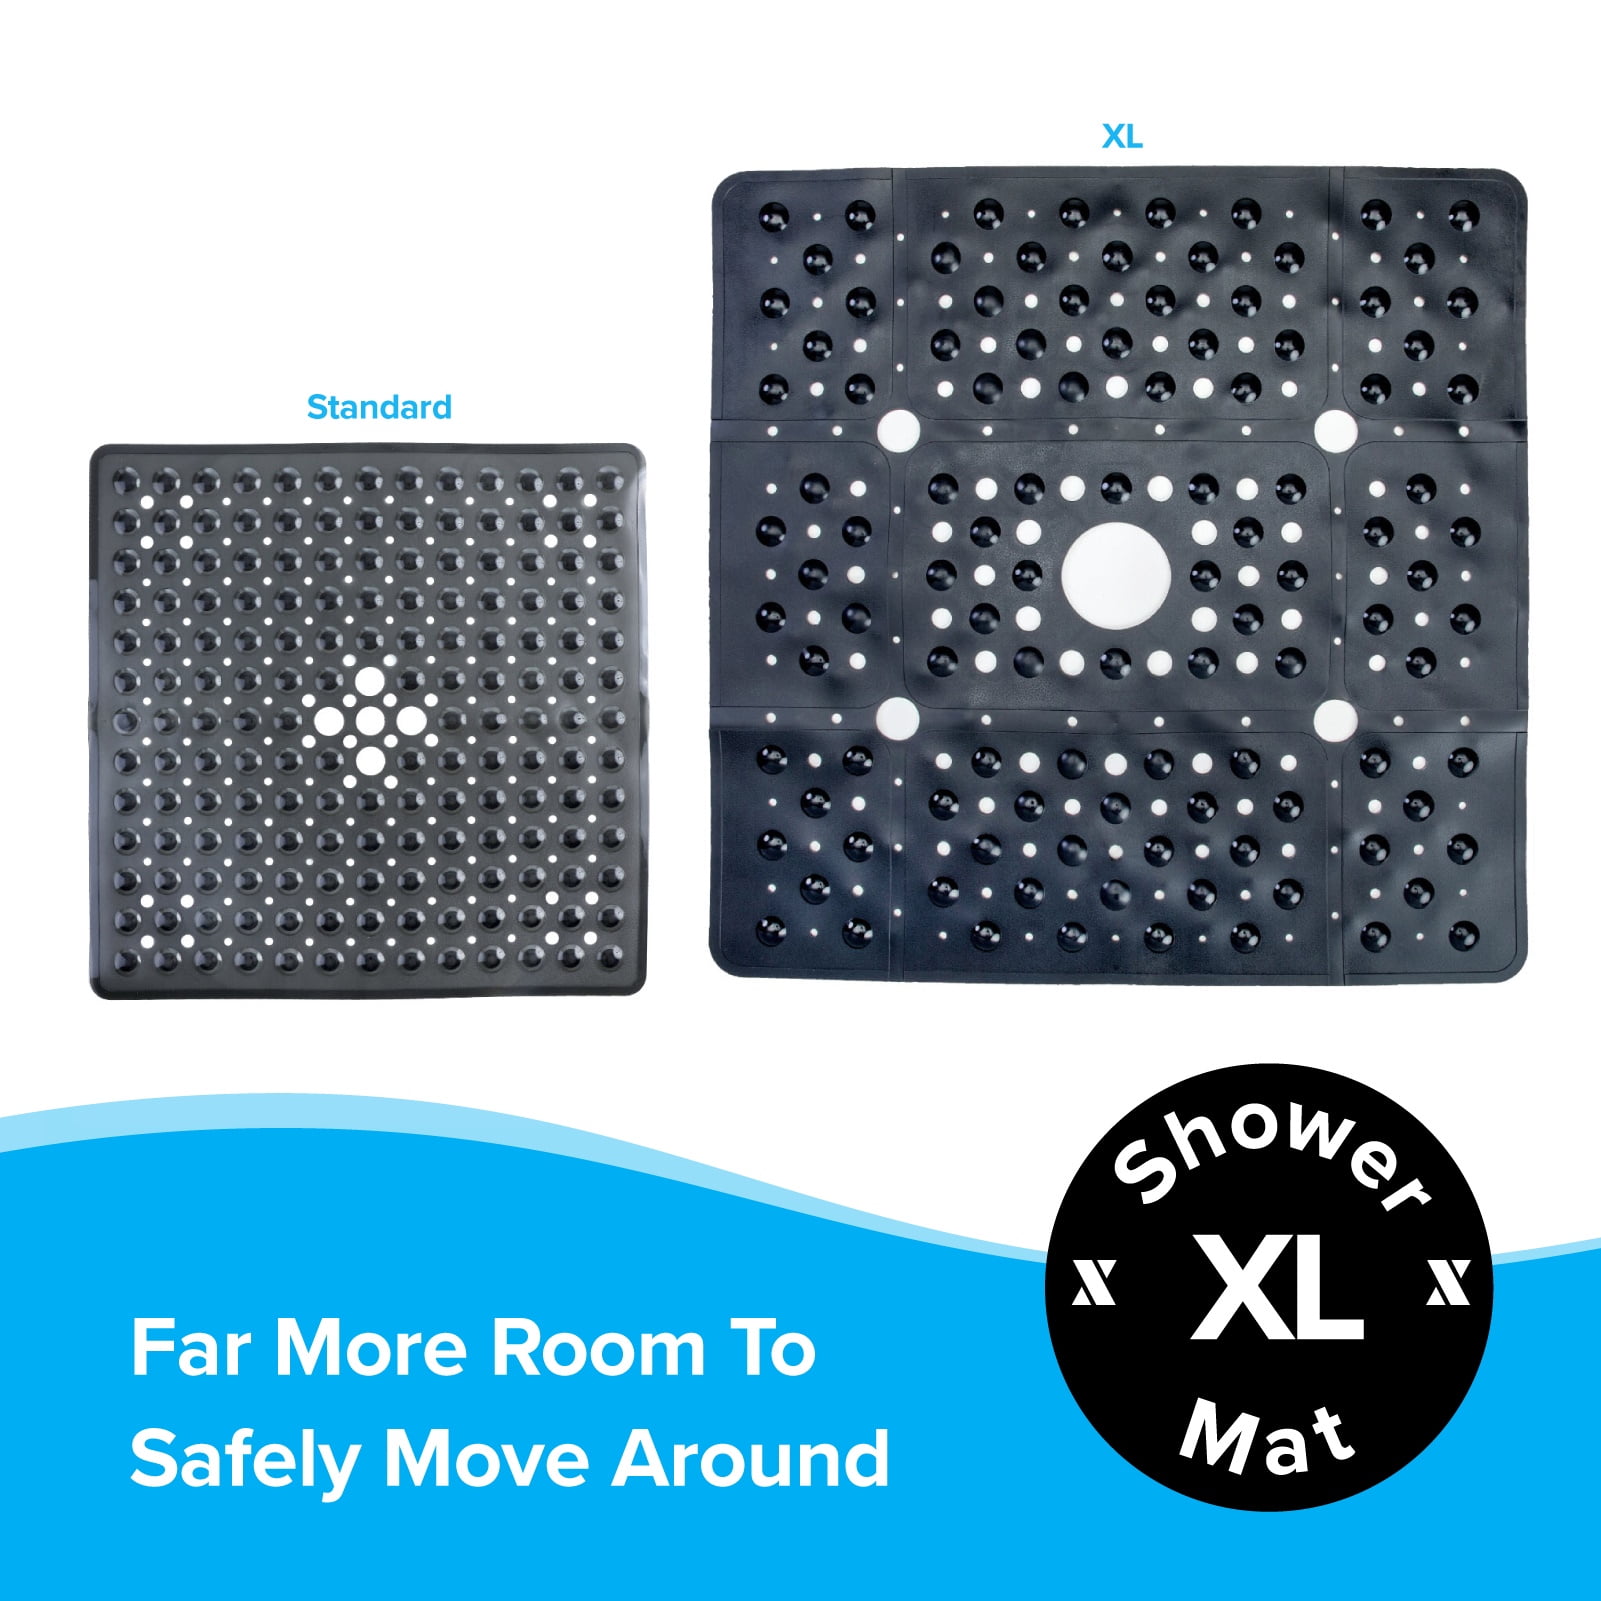 SlipX Solutions Durable Large Rubber Safety Mat 27 x 15, Feel Safe and  Surefooted in Your Bath or Shower, Extra Grippy Surface Texture and Over  200 Power Grip Suction Cups, Machine Washable